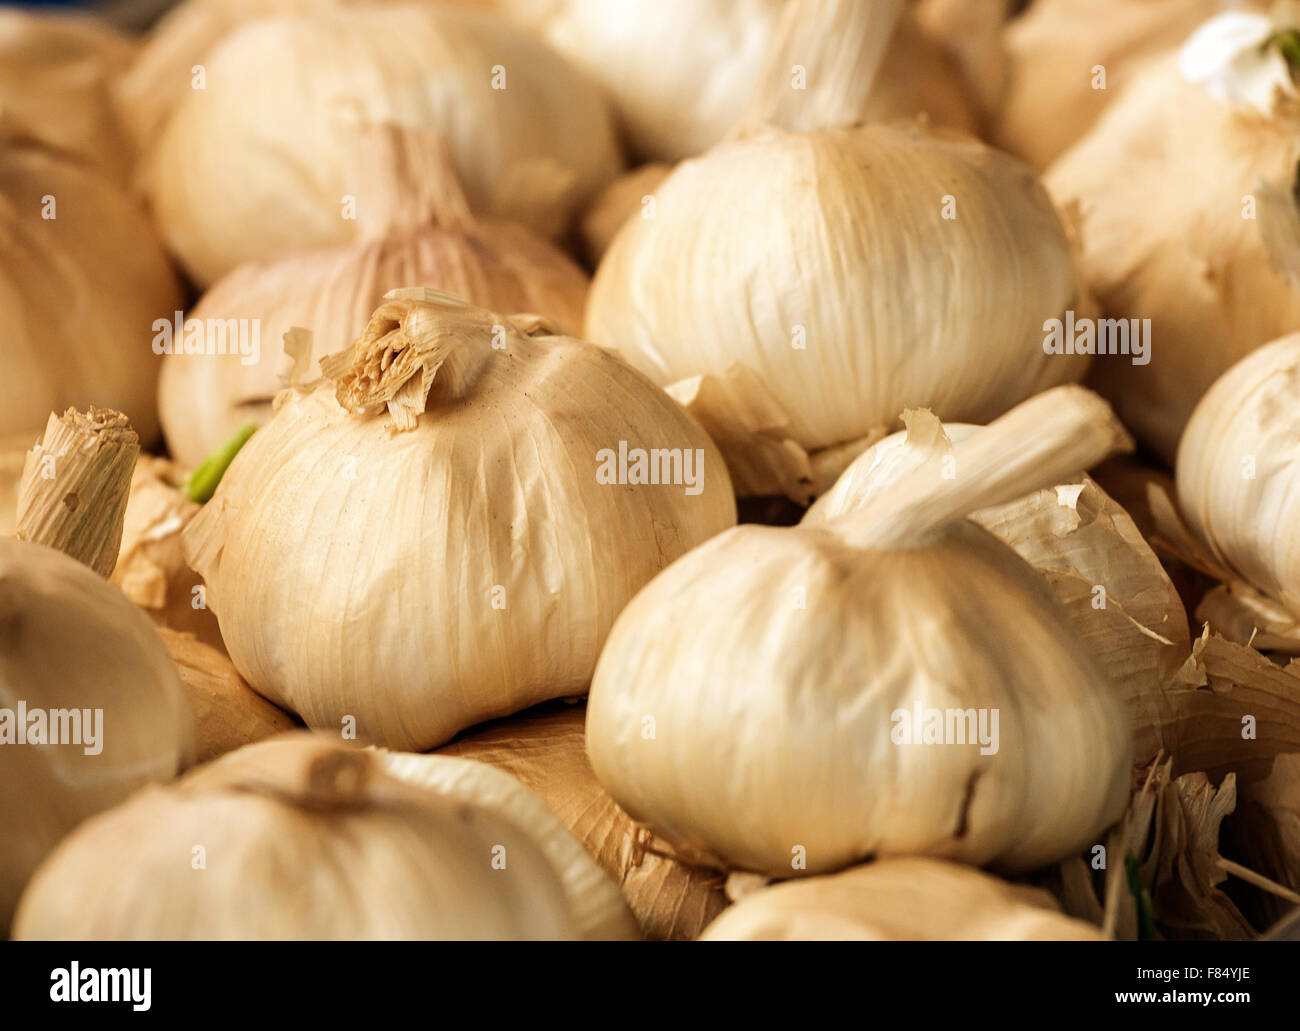 Smoked Garlic bulbs a popular flavoursome ingredient in modern bistro recipes. Stock Photo